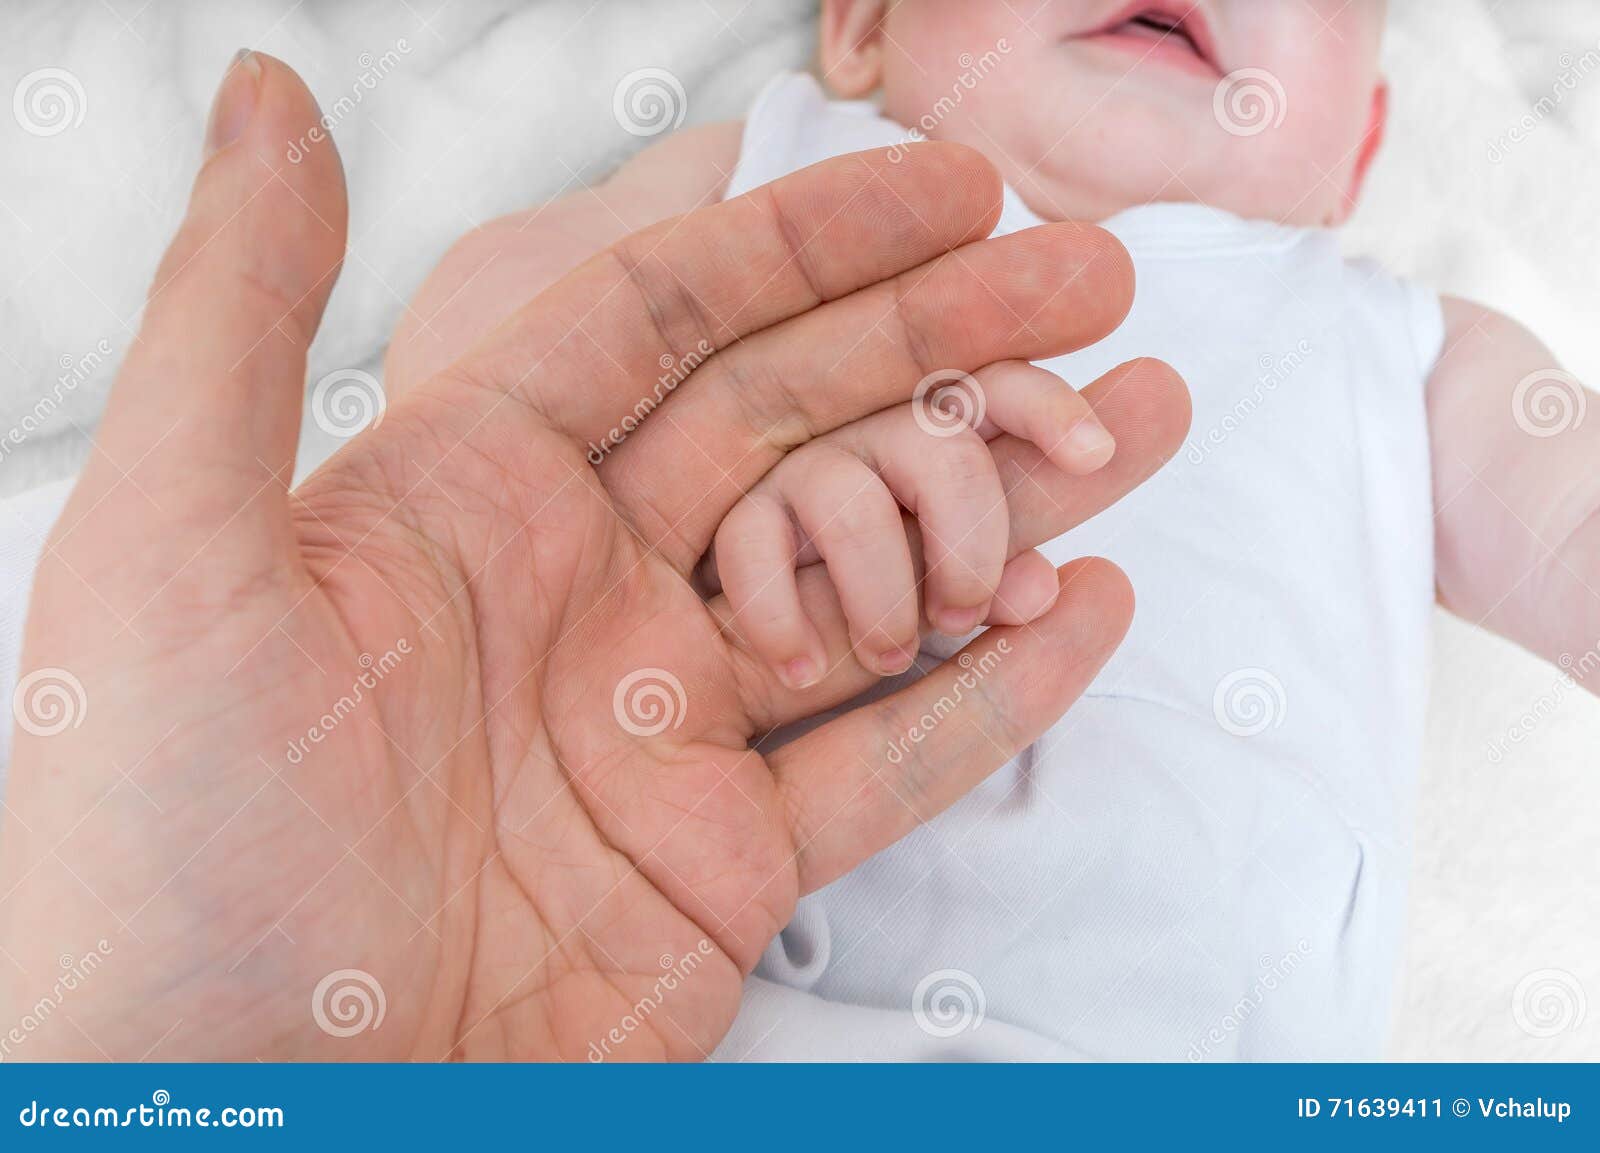 adoption baby concept. man holds little child's hand